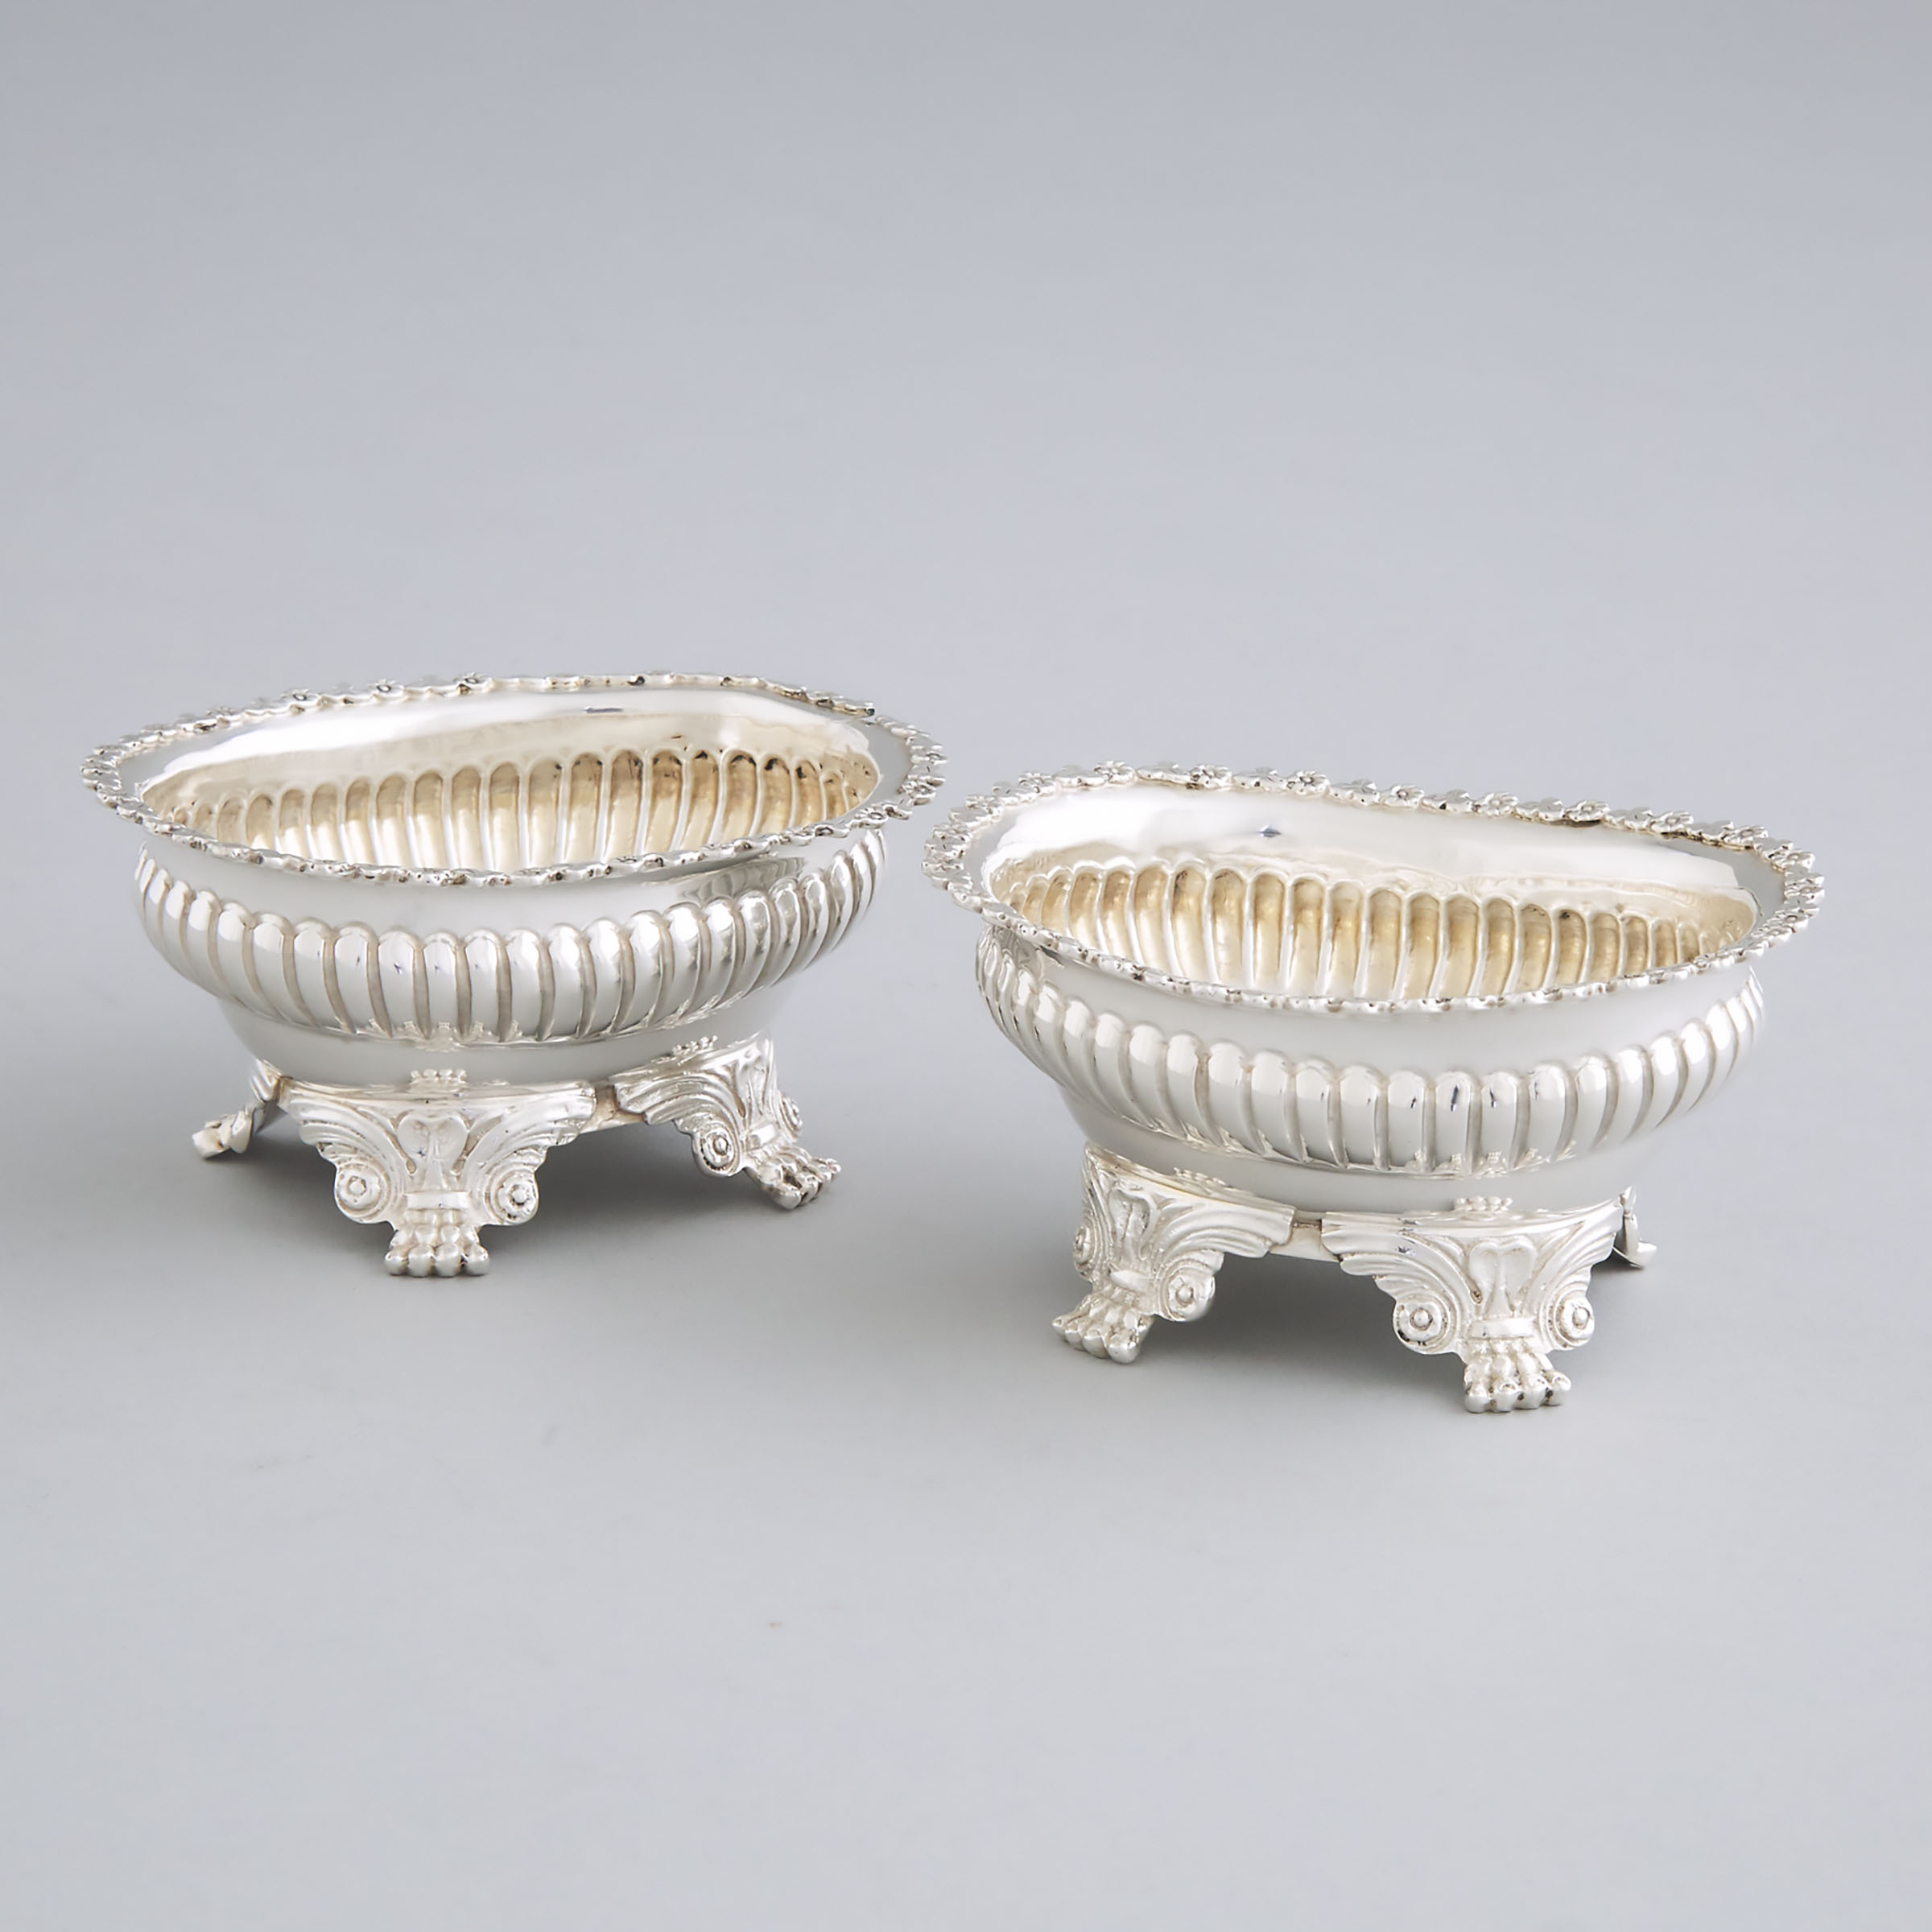 Pair of Edwardian Silver Oval Salt Cellars, George Nathan & Ridley Hayes, Chester, 1910